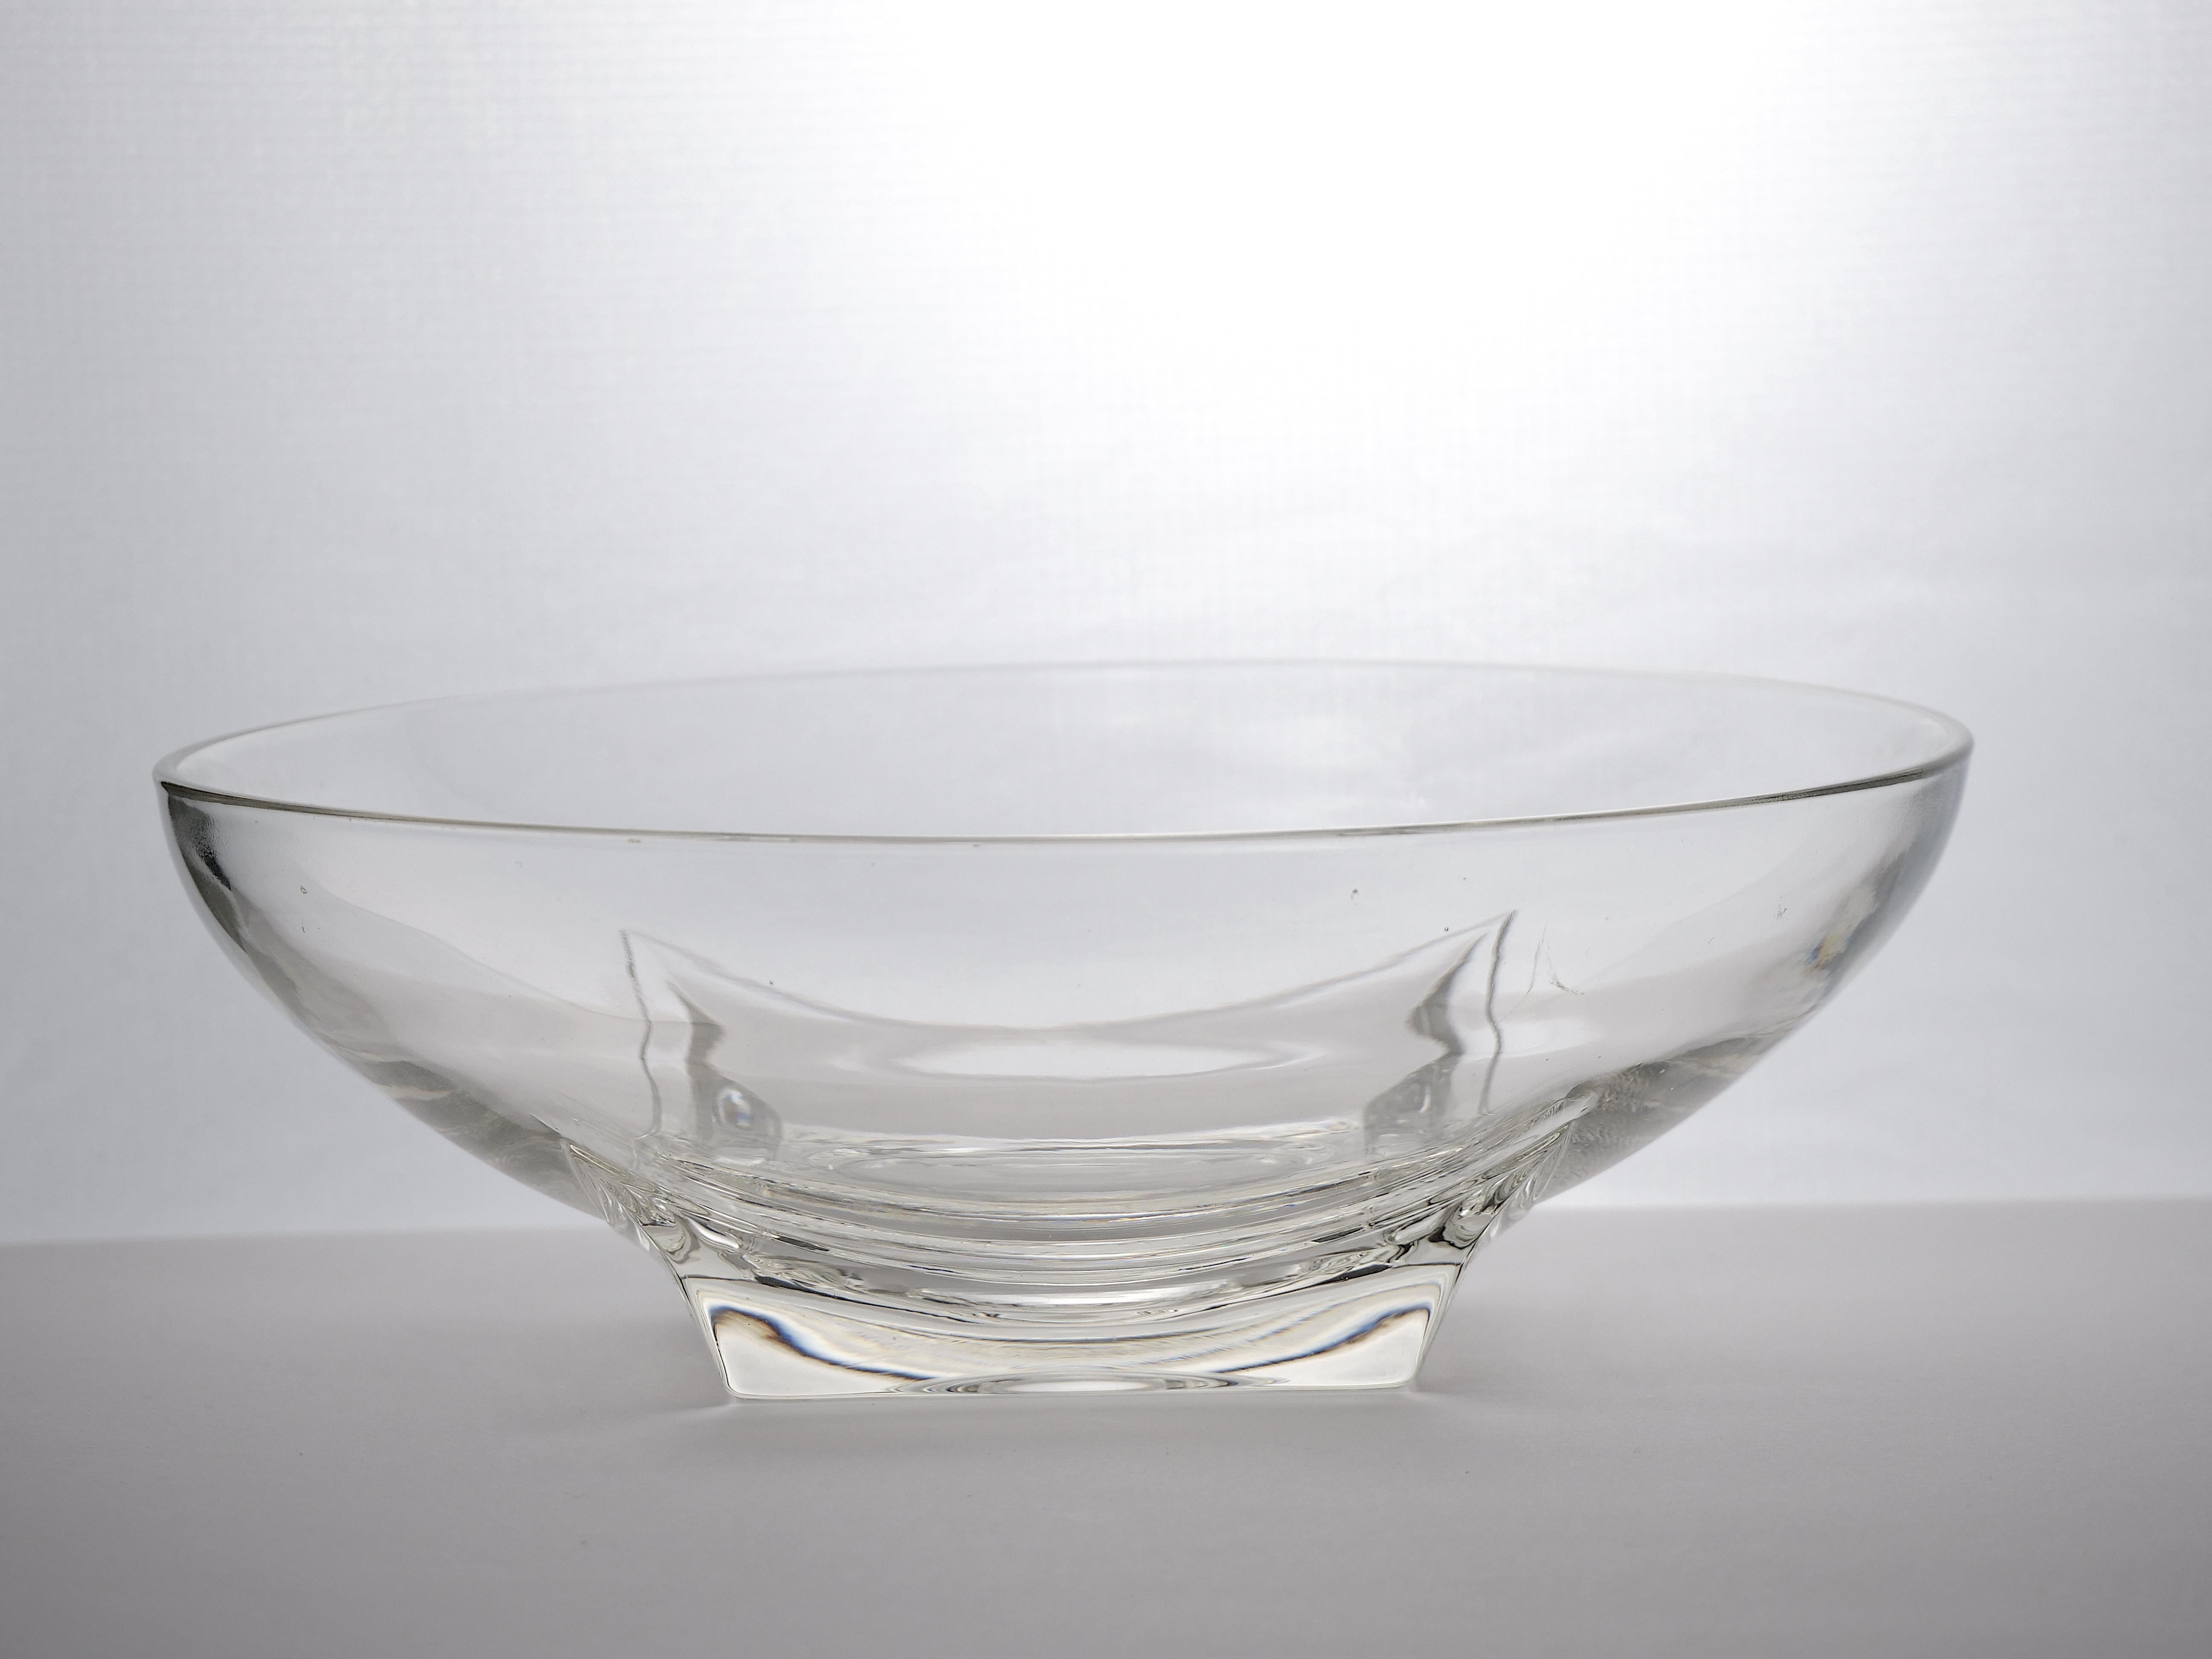 20th Century French Mid-Century Modern Art Deco Style Glass Centerpiece Bowl For Sale